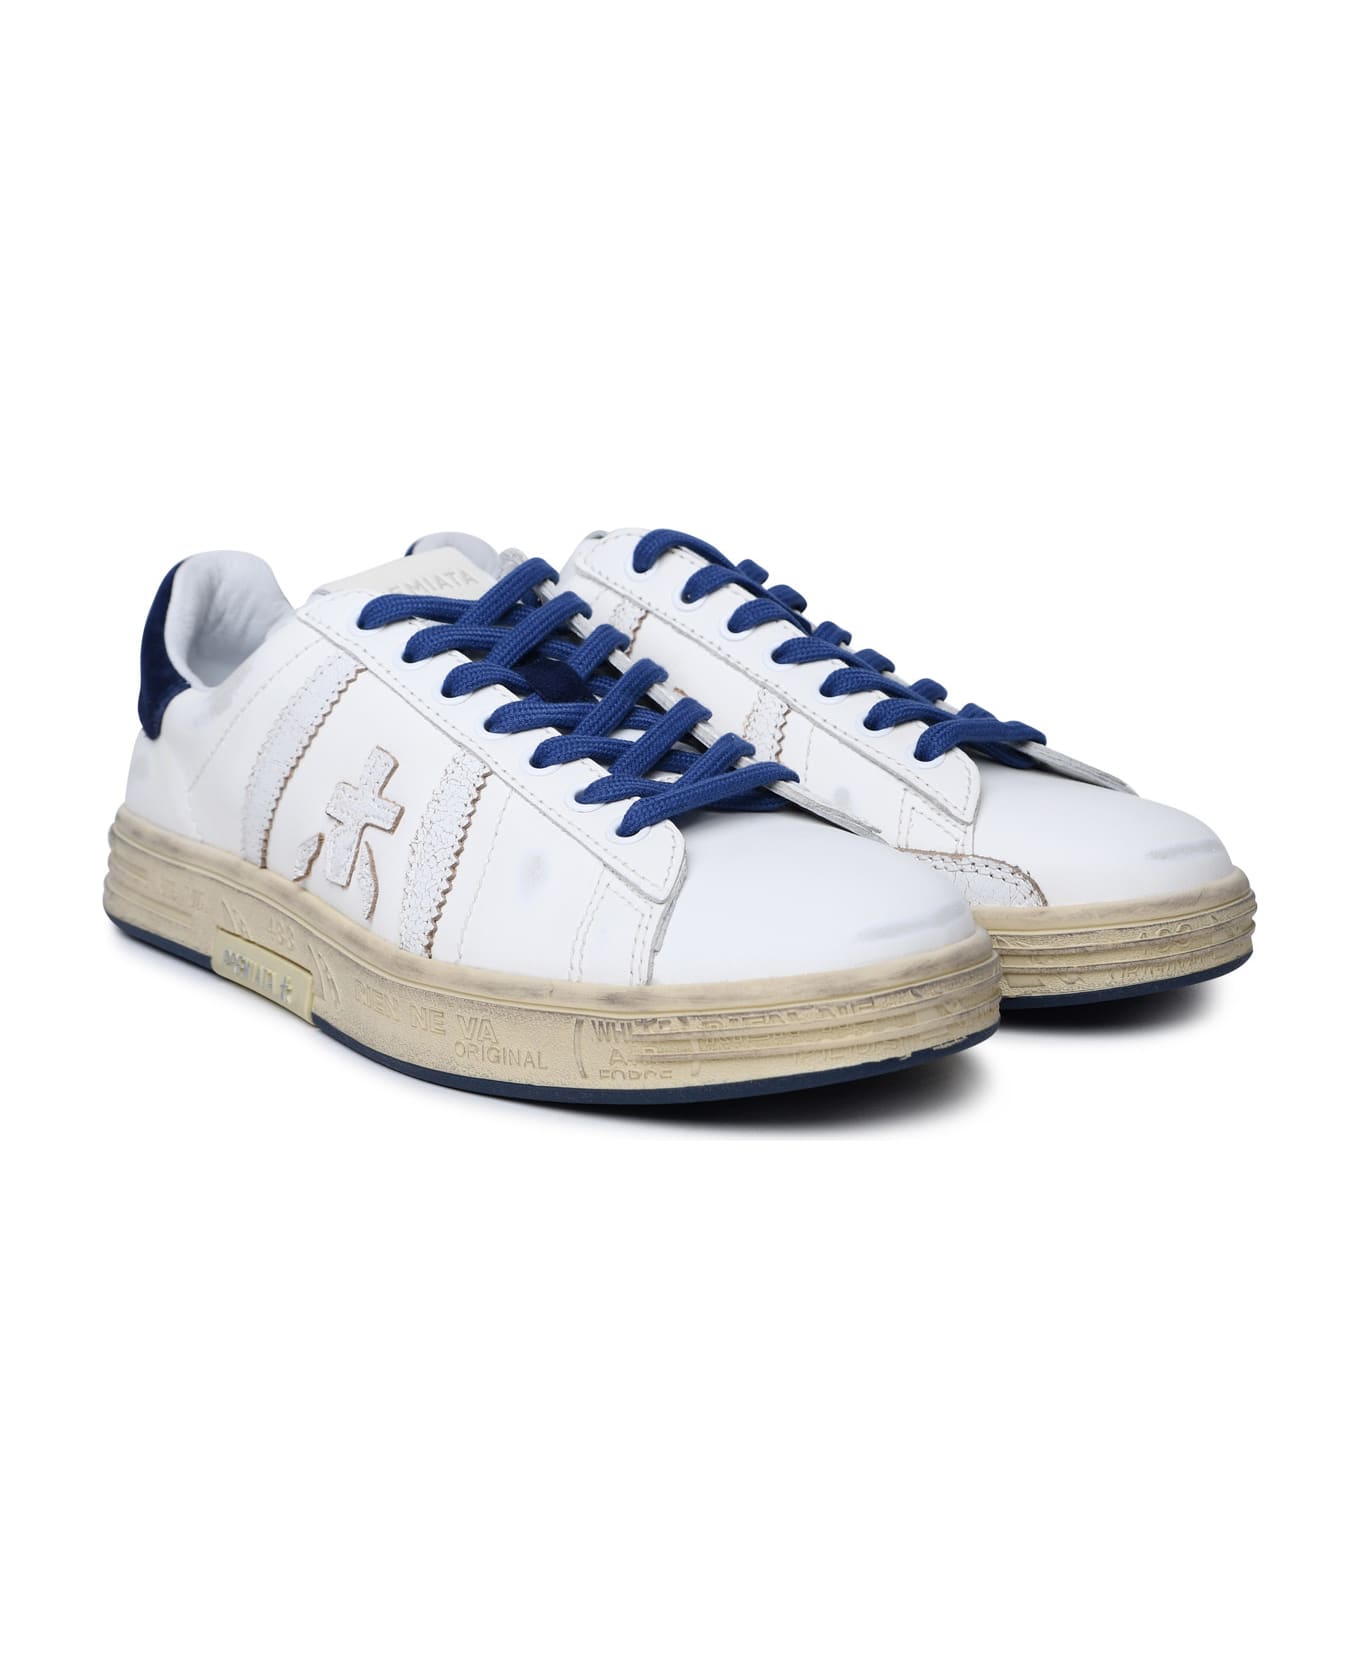 Premiata 'russell' White Leather Sneakers - White